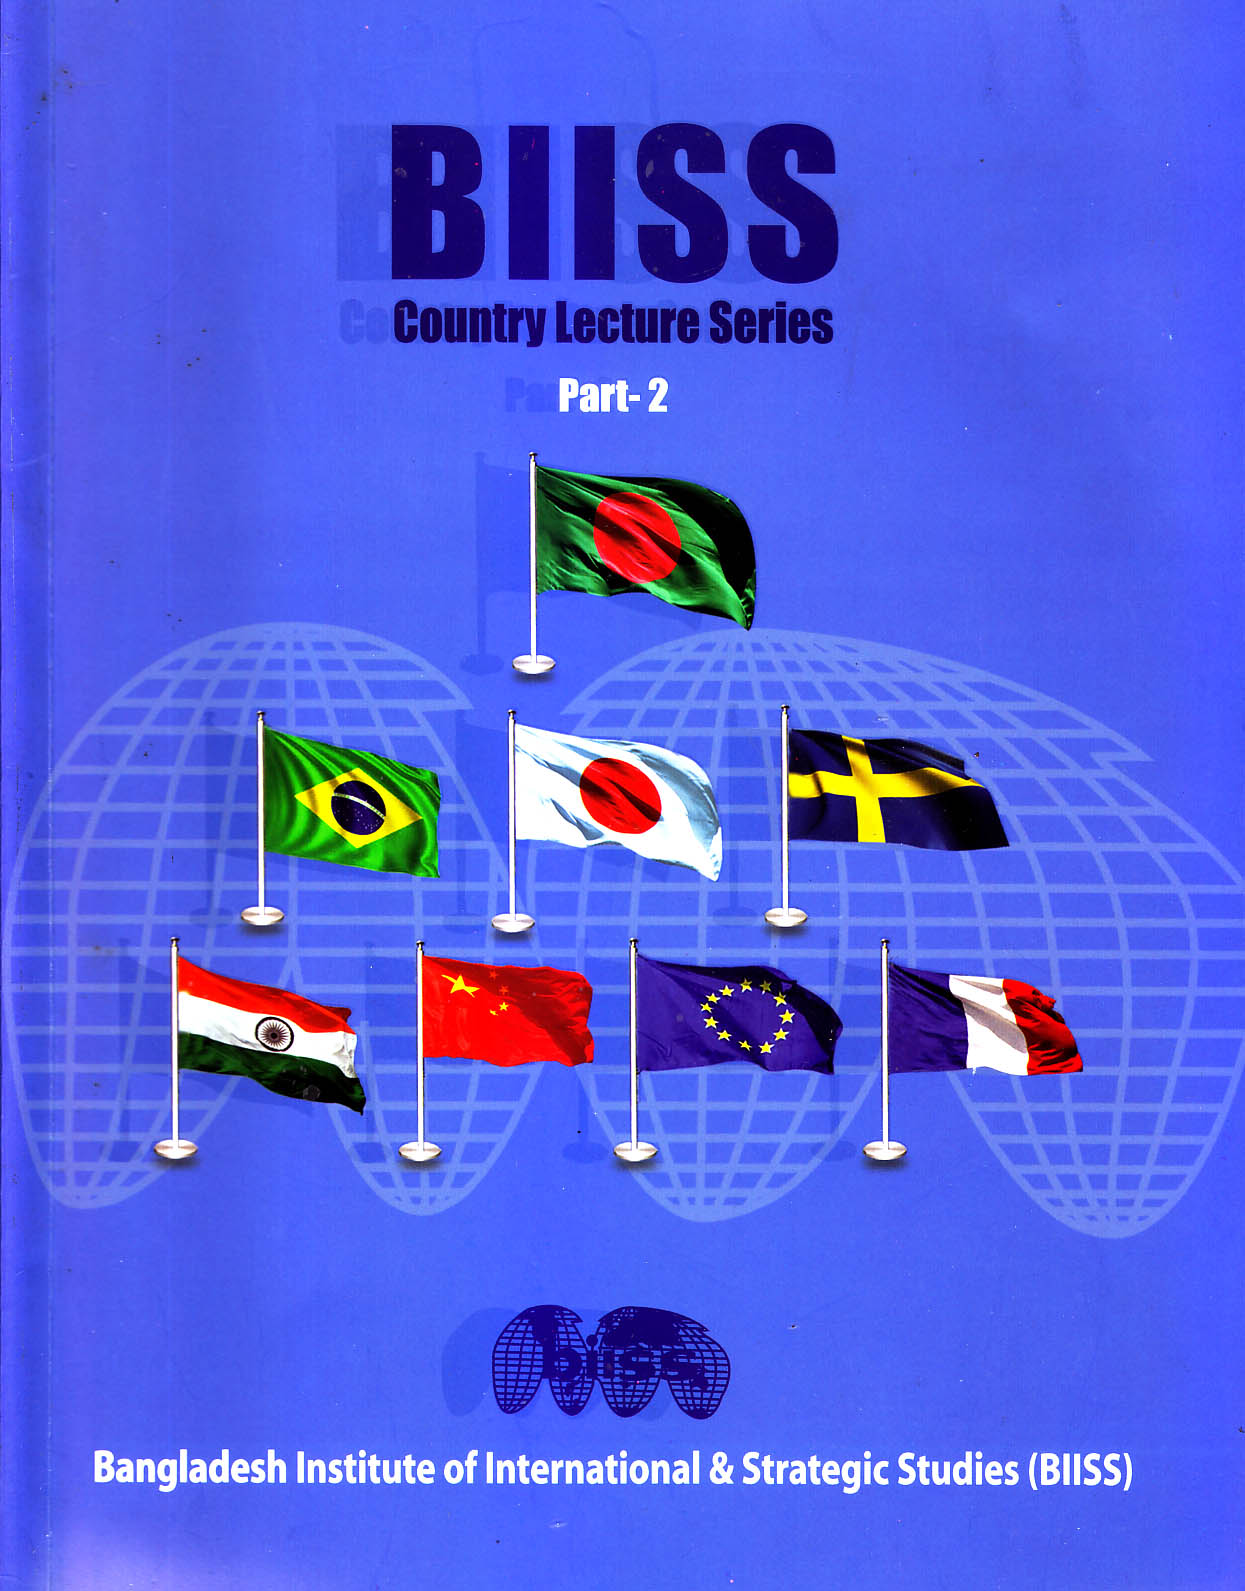 BIISS Country Lecture Series Part-2